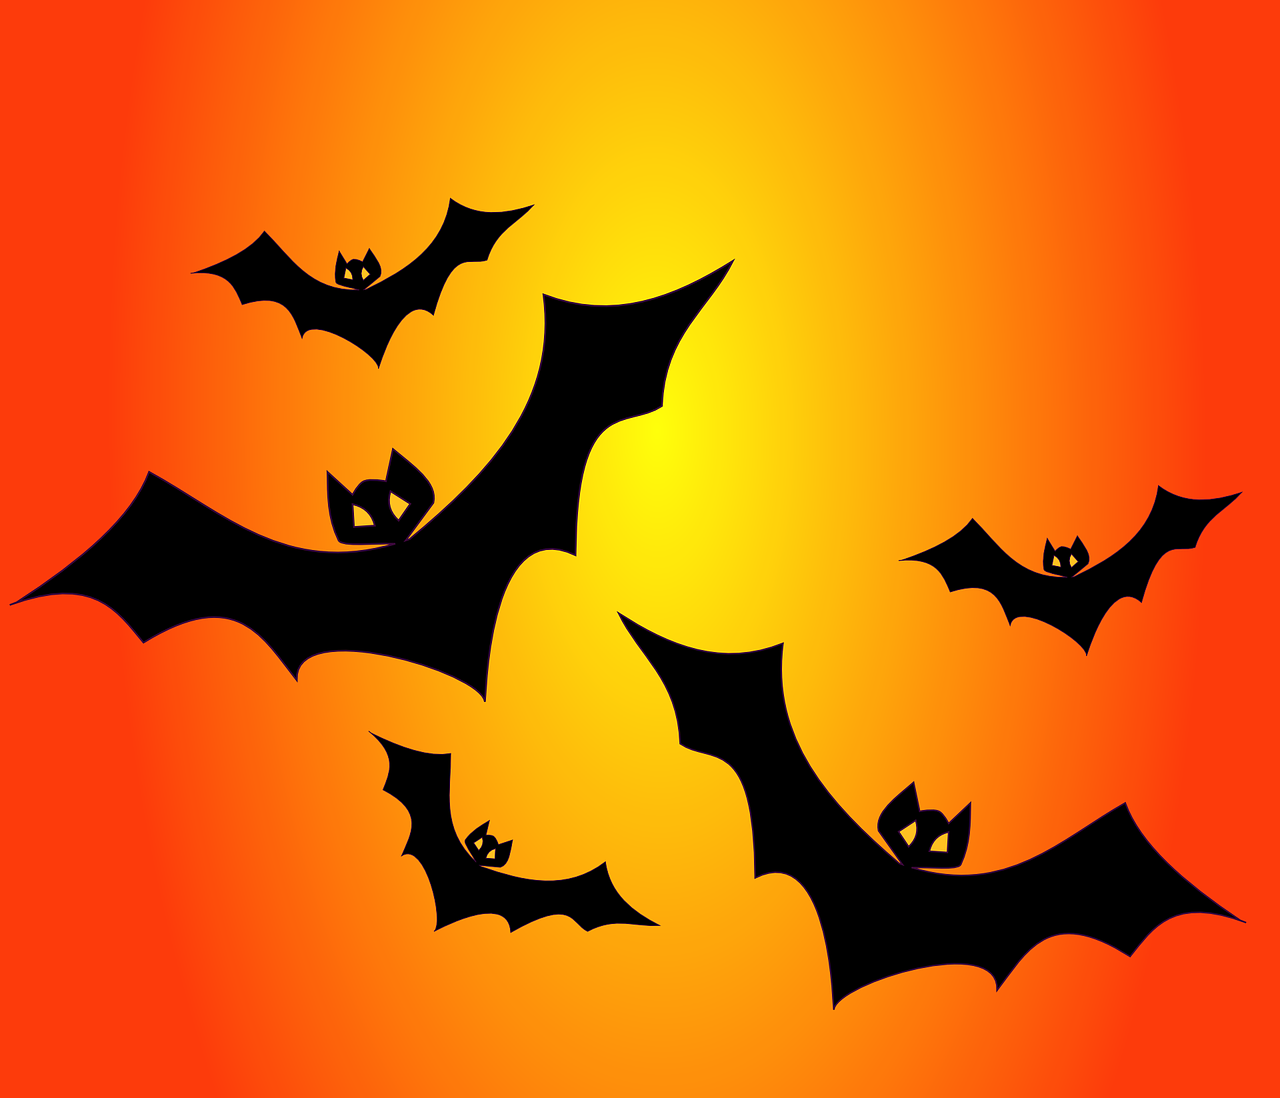 Silhouettes of bats on an orange background